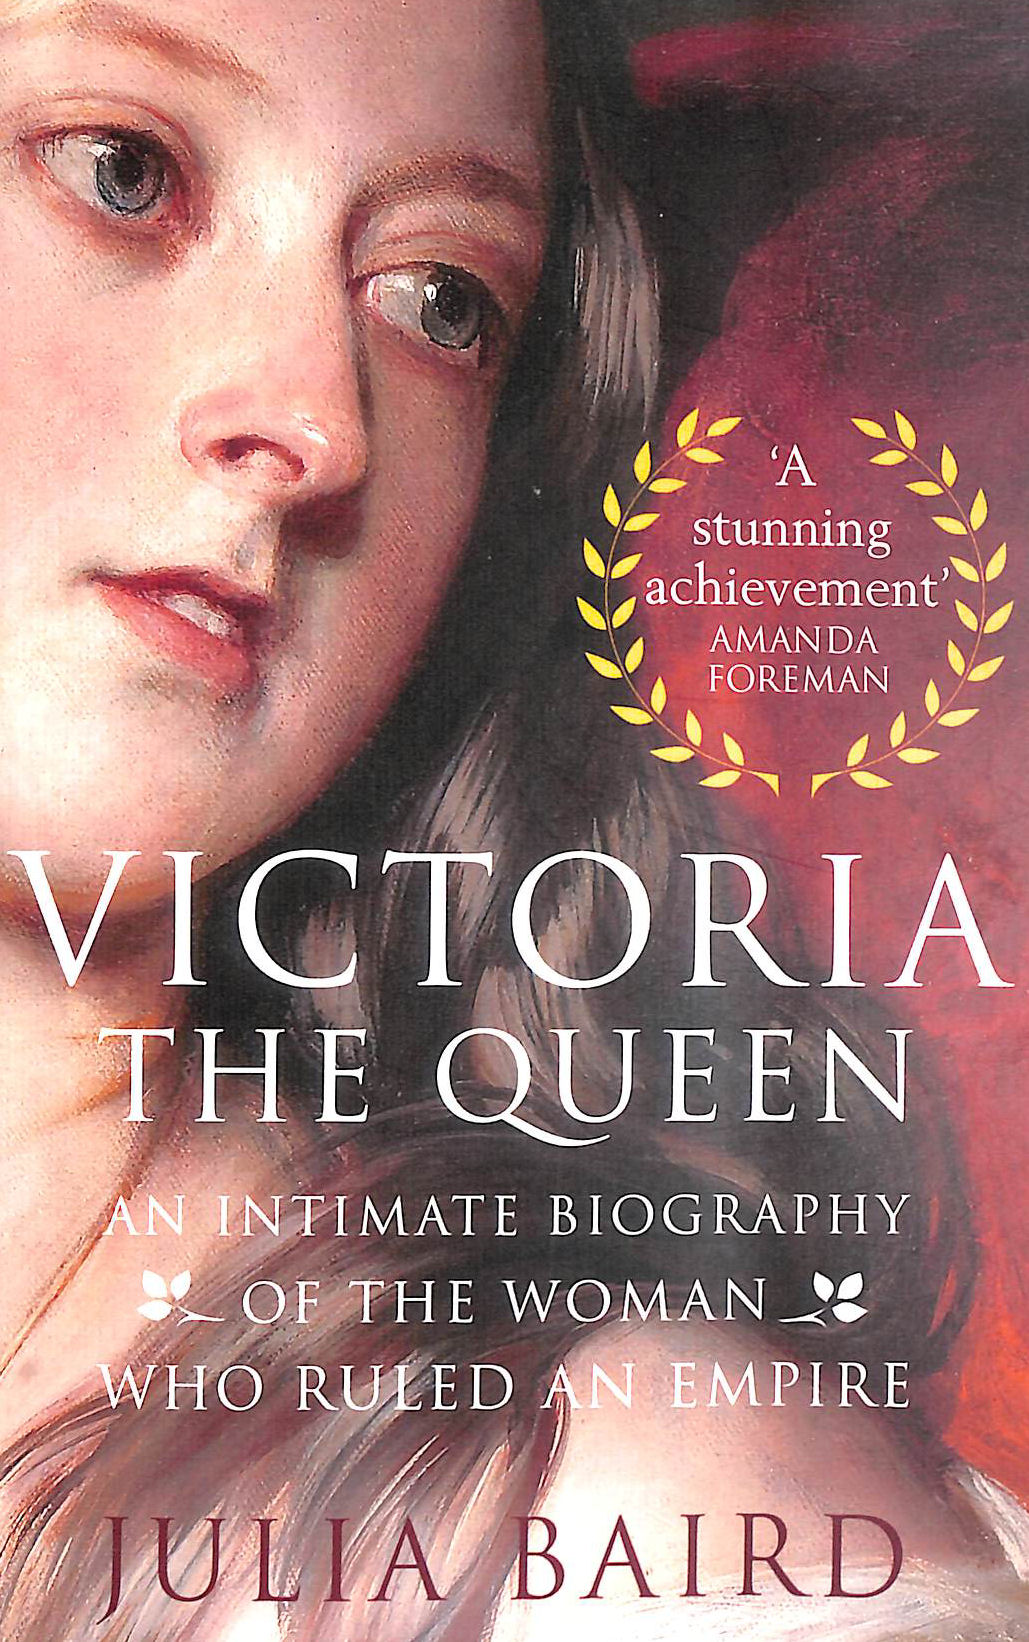 BAIRD, JULIA - Victoria: The Queen: An Intimate Biography of the Woman who Ruled an Empire